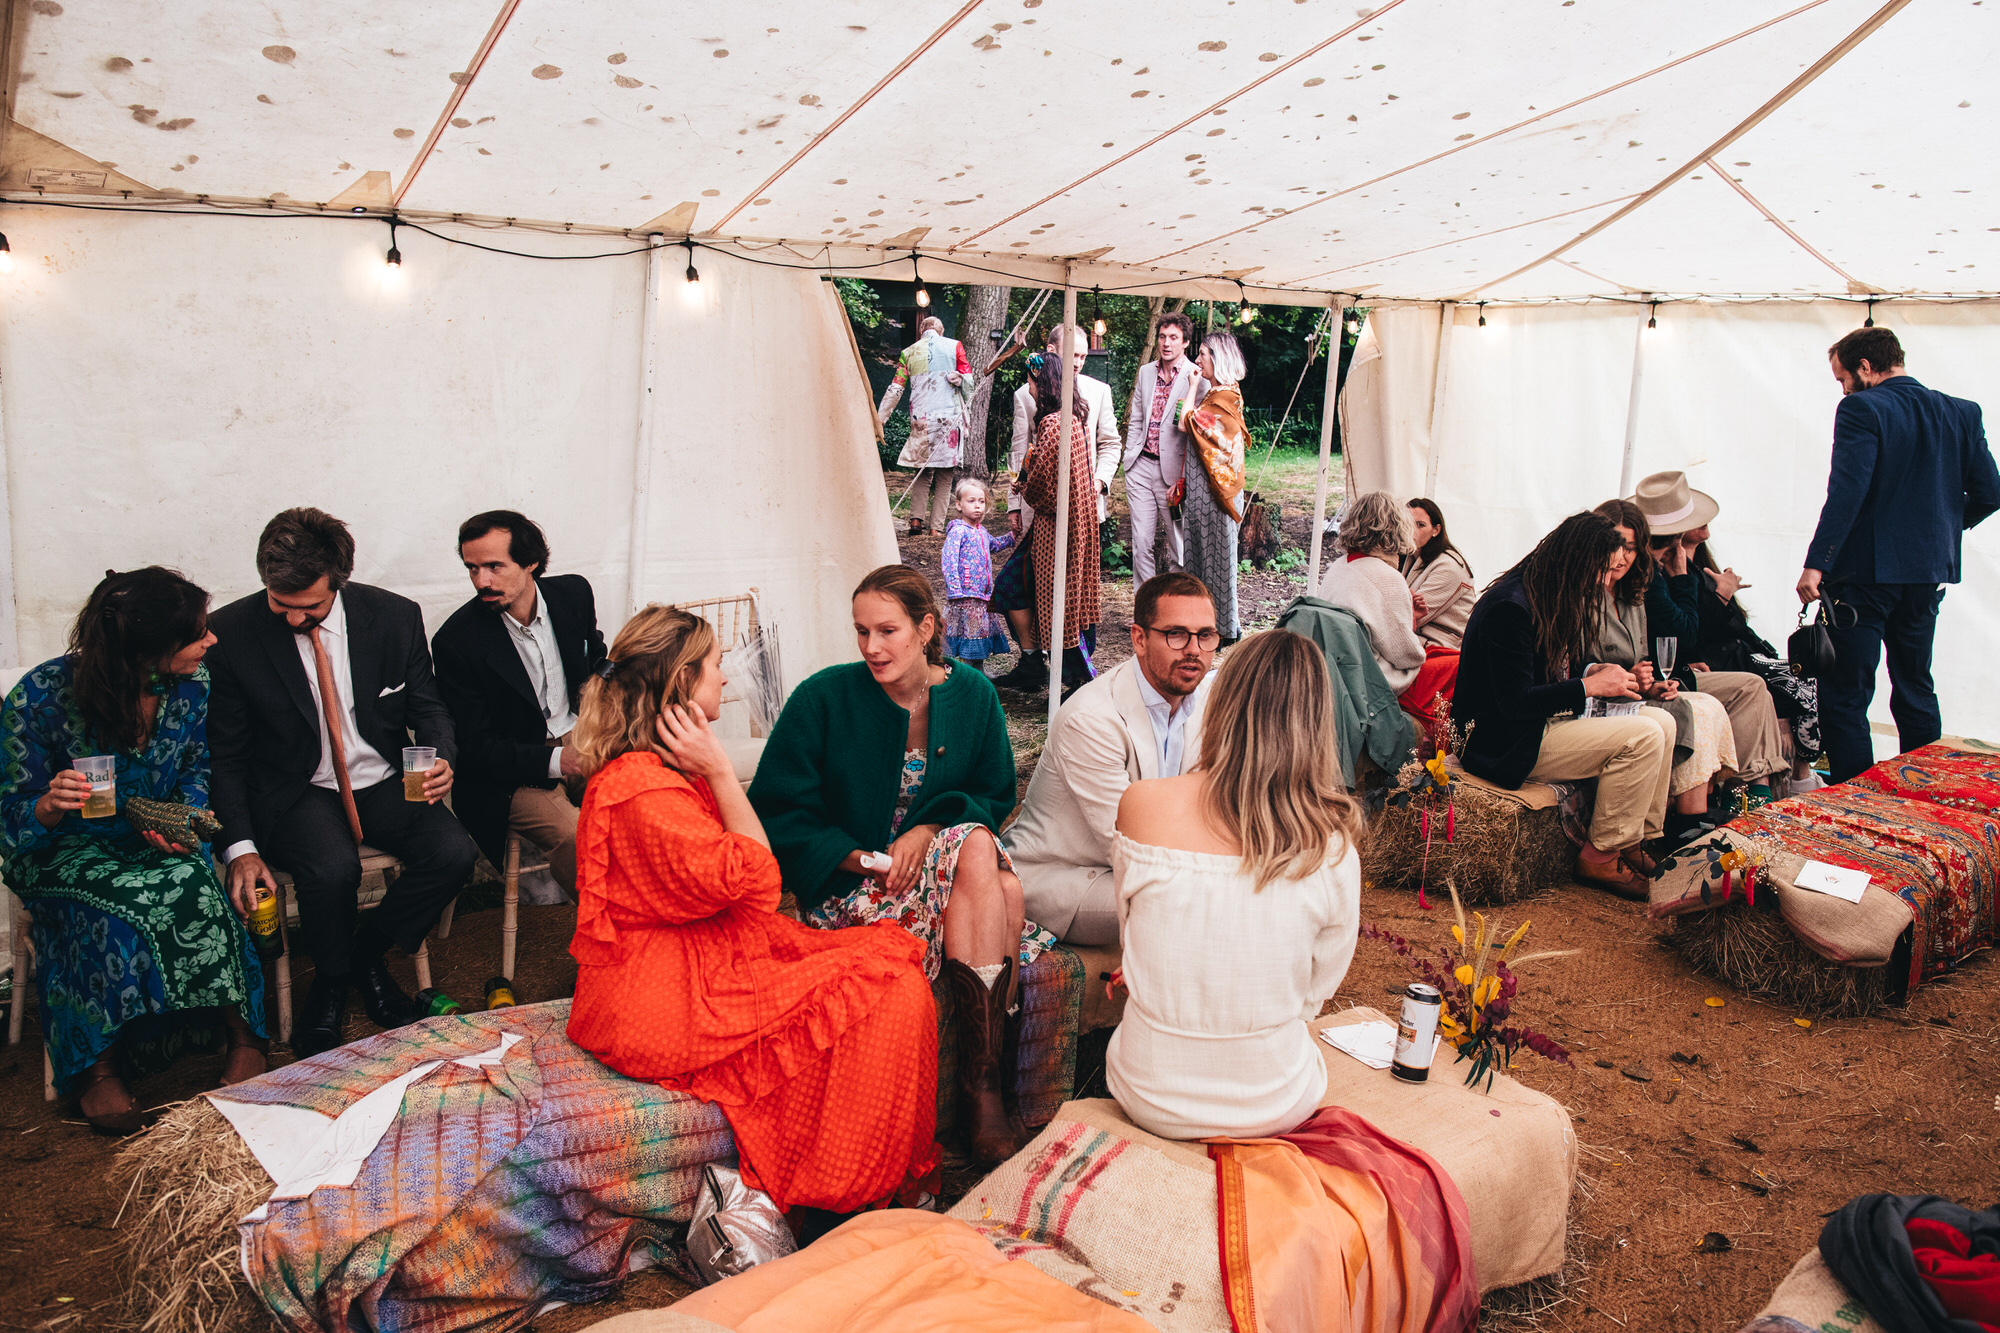 guests sitting on hay bales talking inside marquee tent